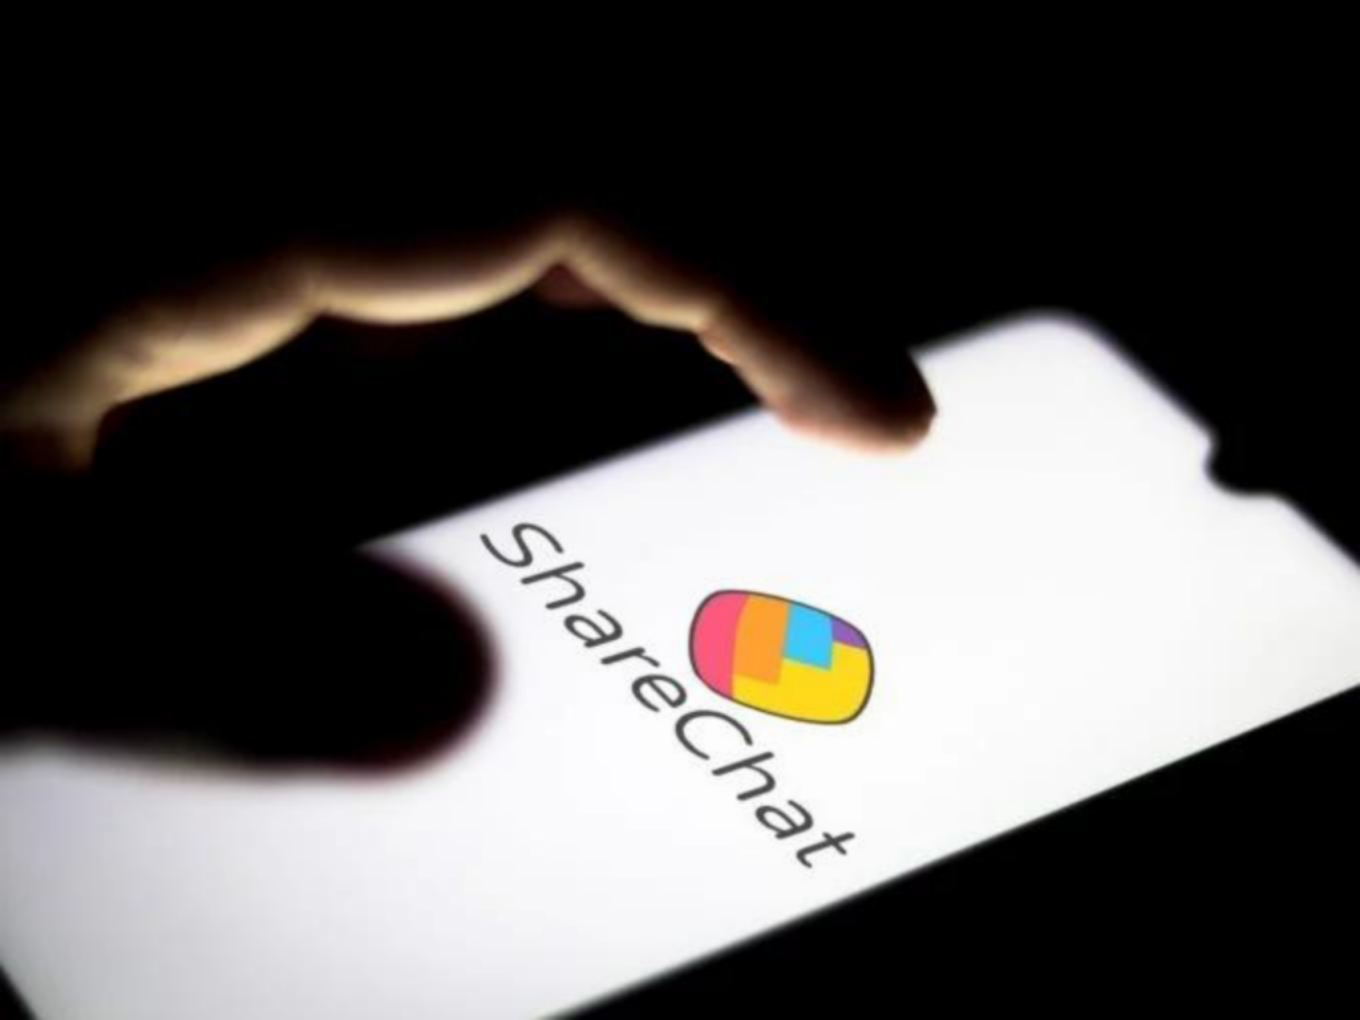 Sharechatsex - ShareChat Received 5 Mn user Complaints in April, 2022